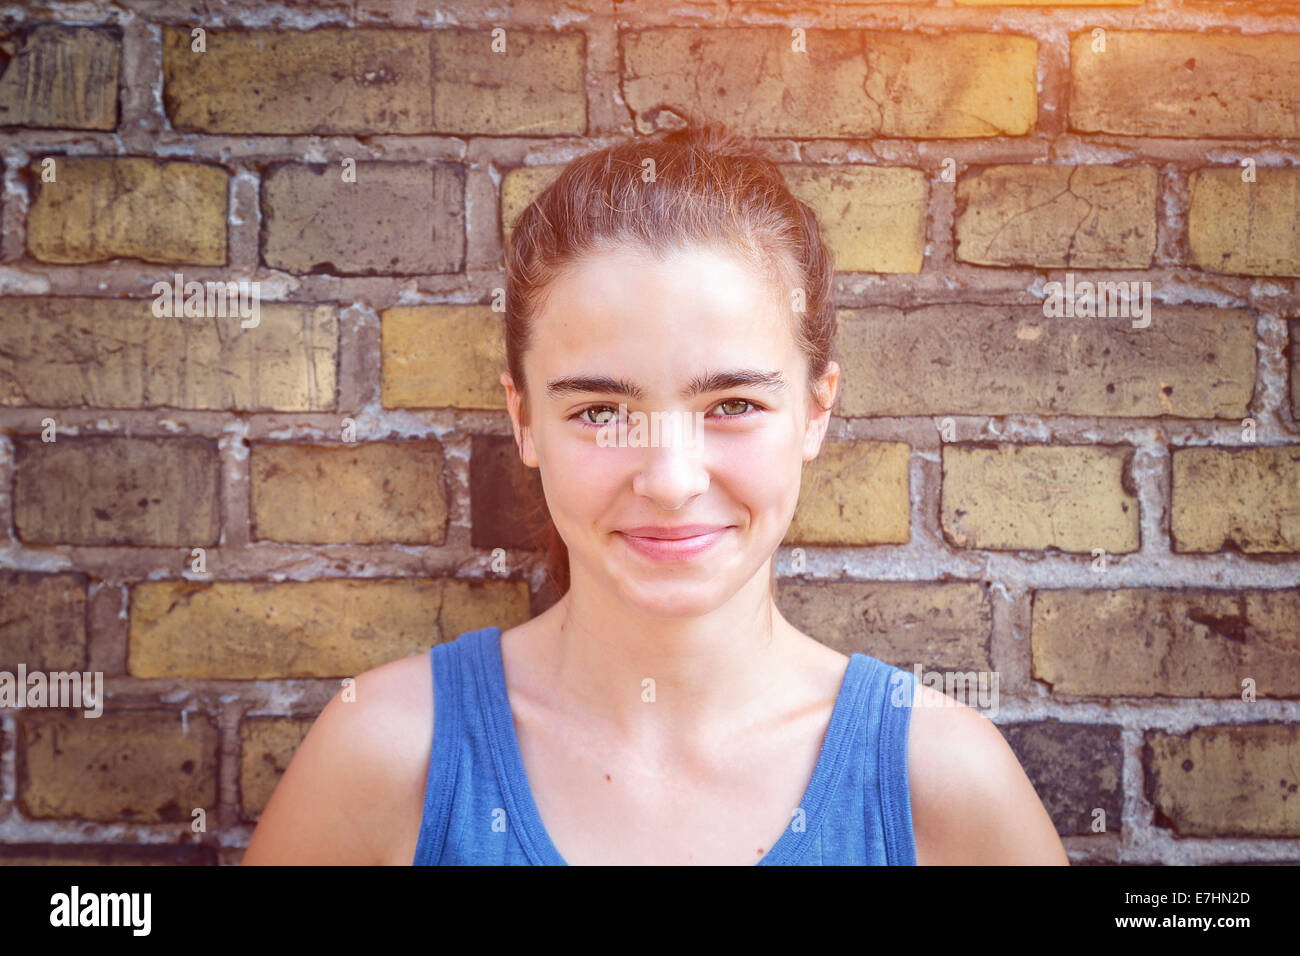 portrait of a smiling teenager girl leaning against a brick wall. Stock Photo